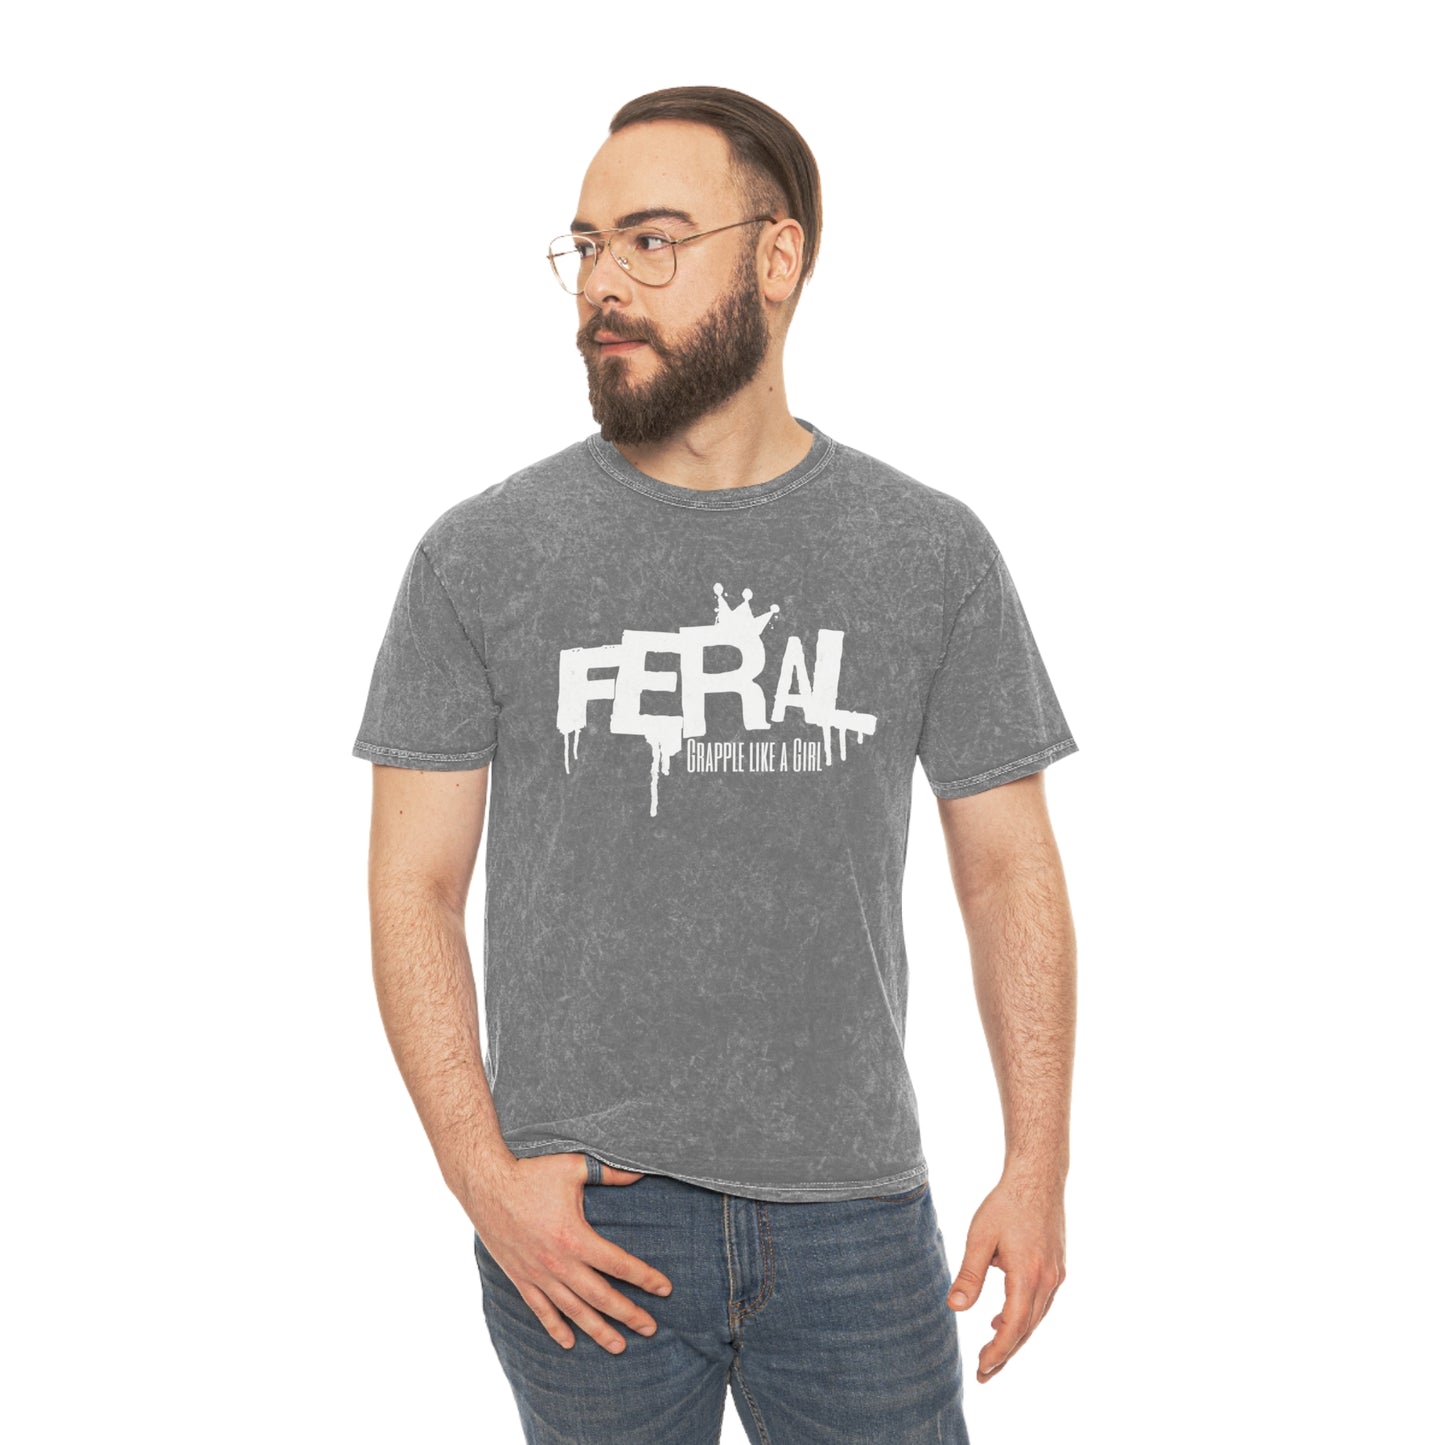 Feral Grapple like a Girl Unisex Fit Mineral Wash T-Shirt